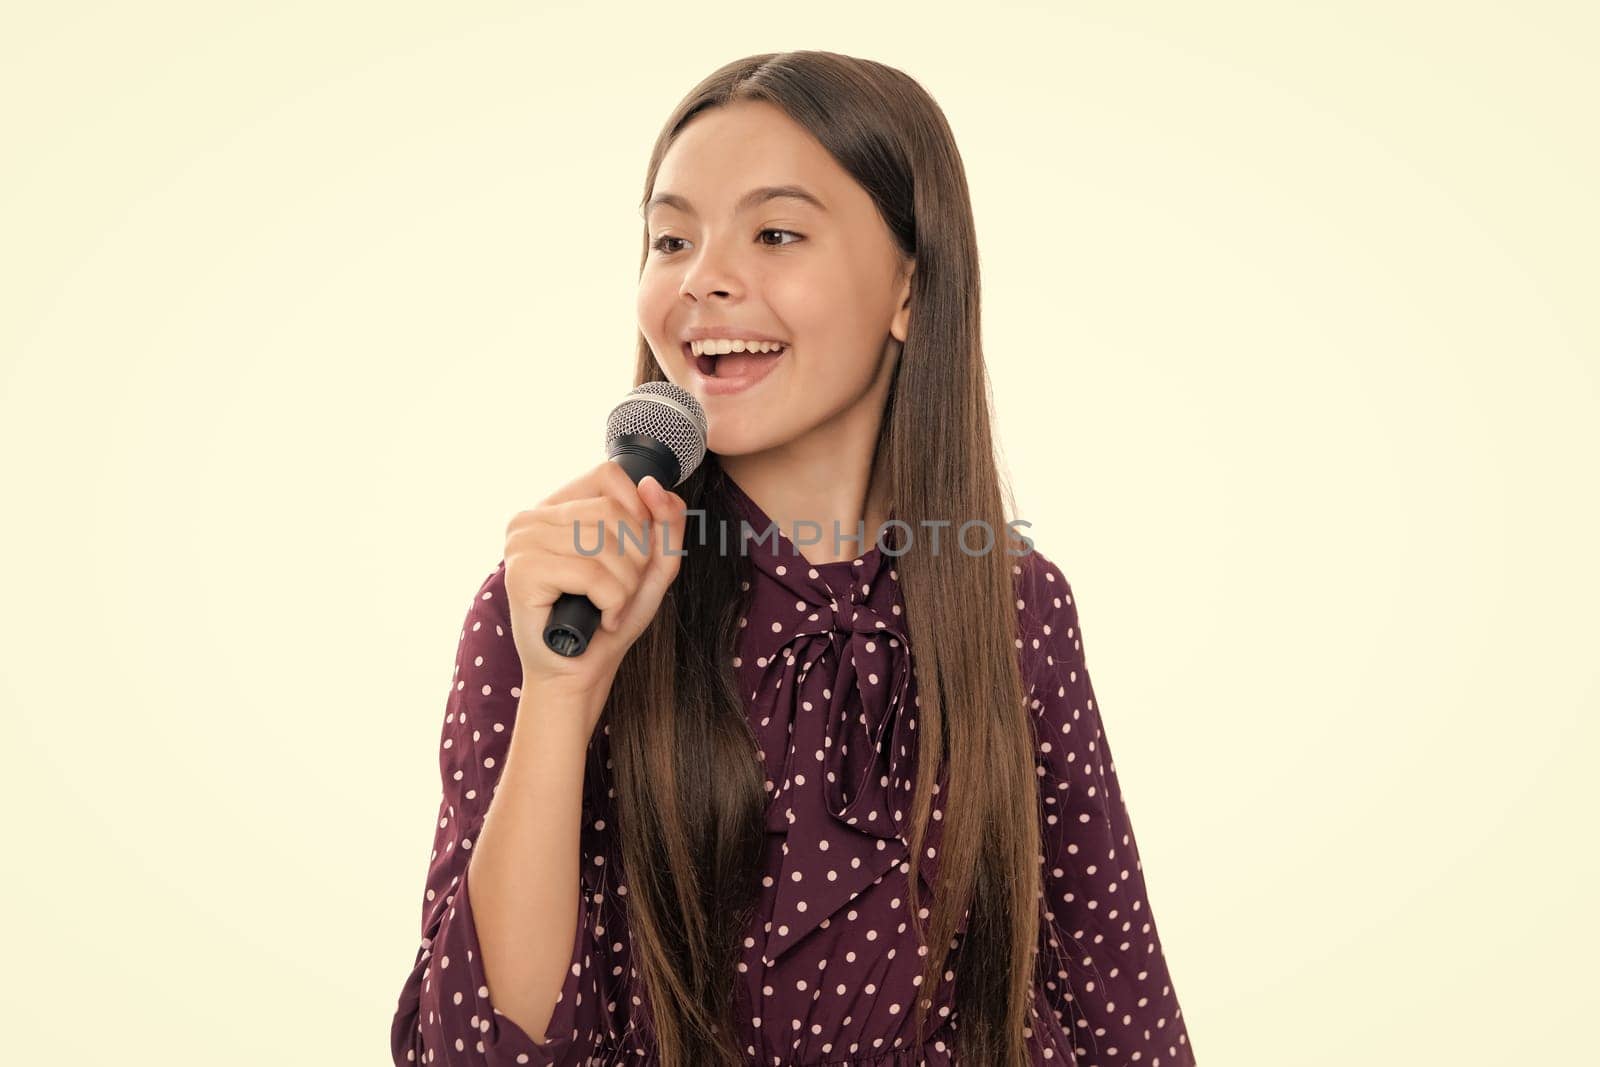 Kid singing. Emotional amazed teen girl with microphone singing against white background. Singing lovely singer girl hold microphone. by RedFoxStudio